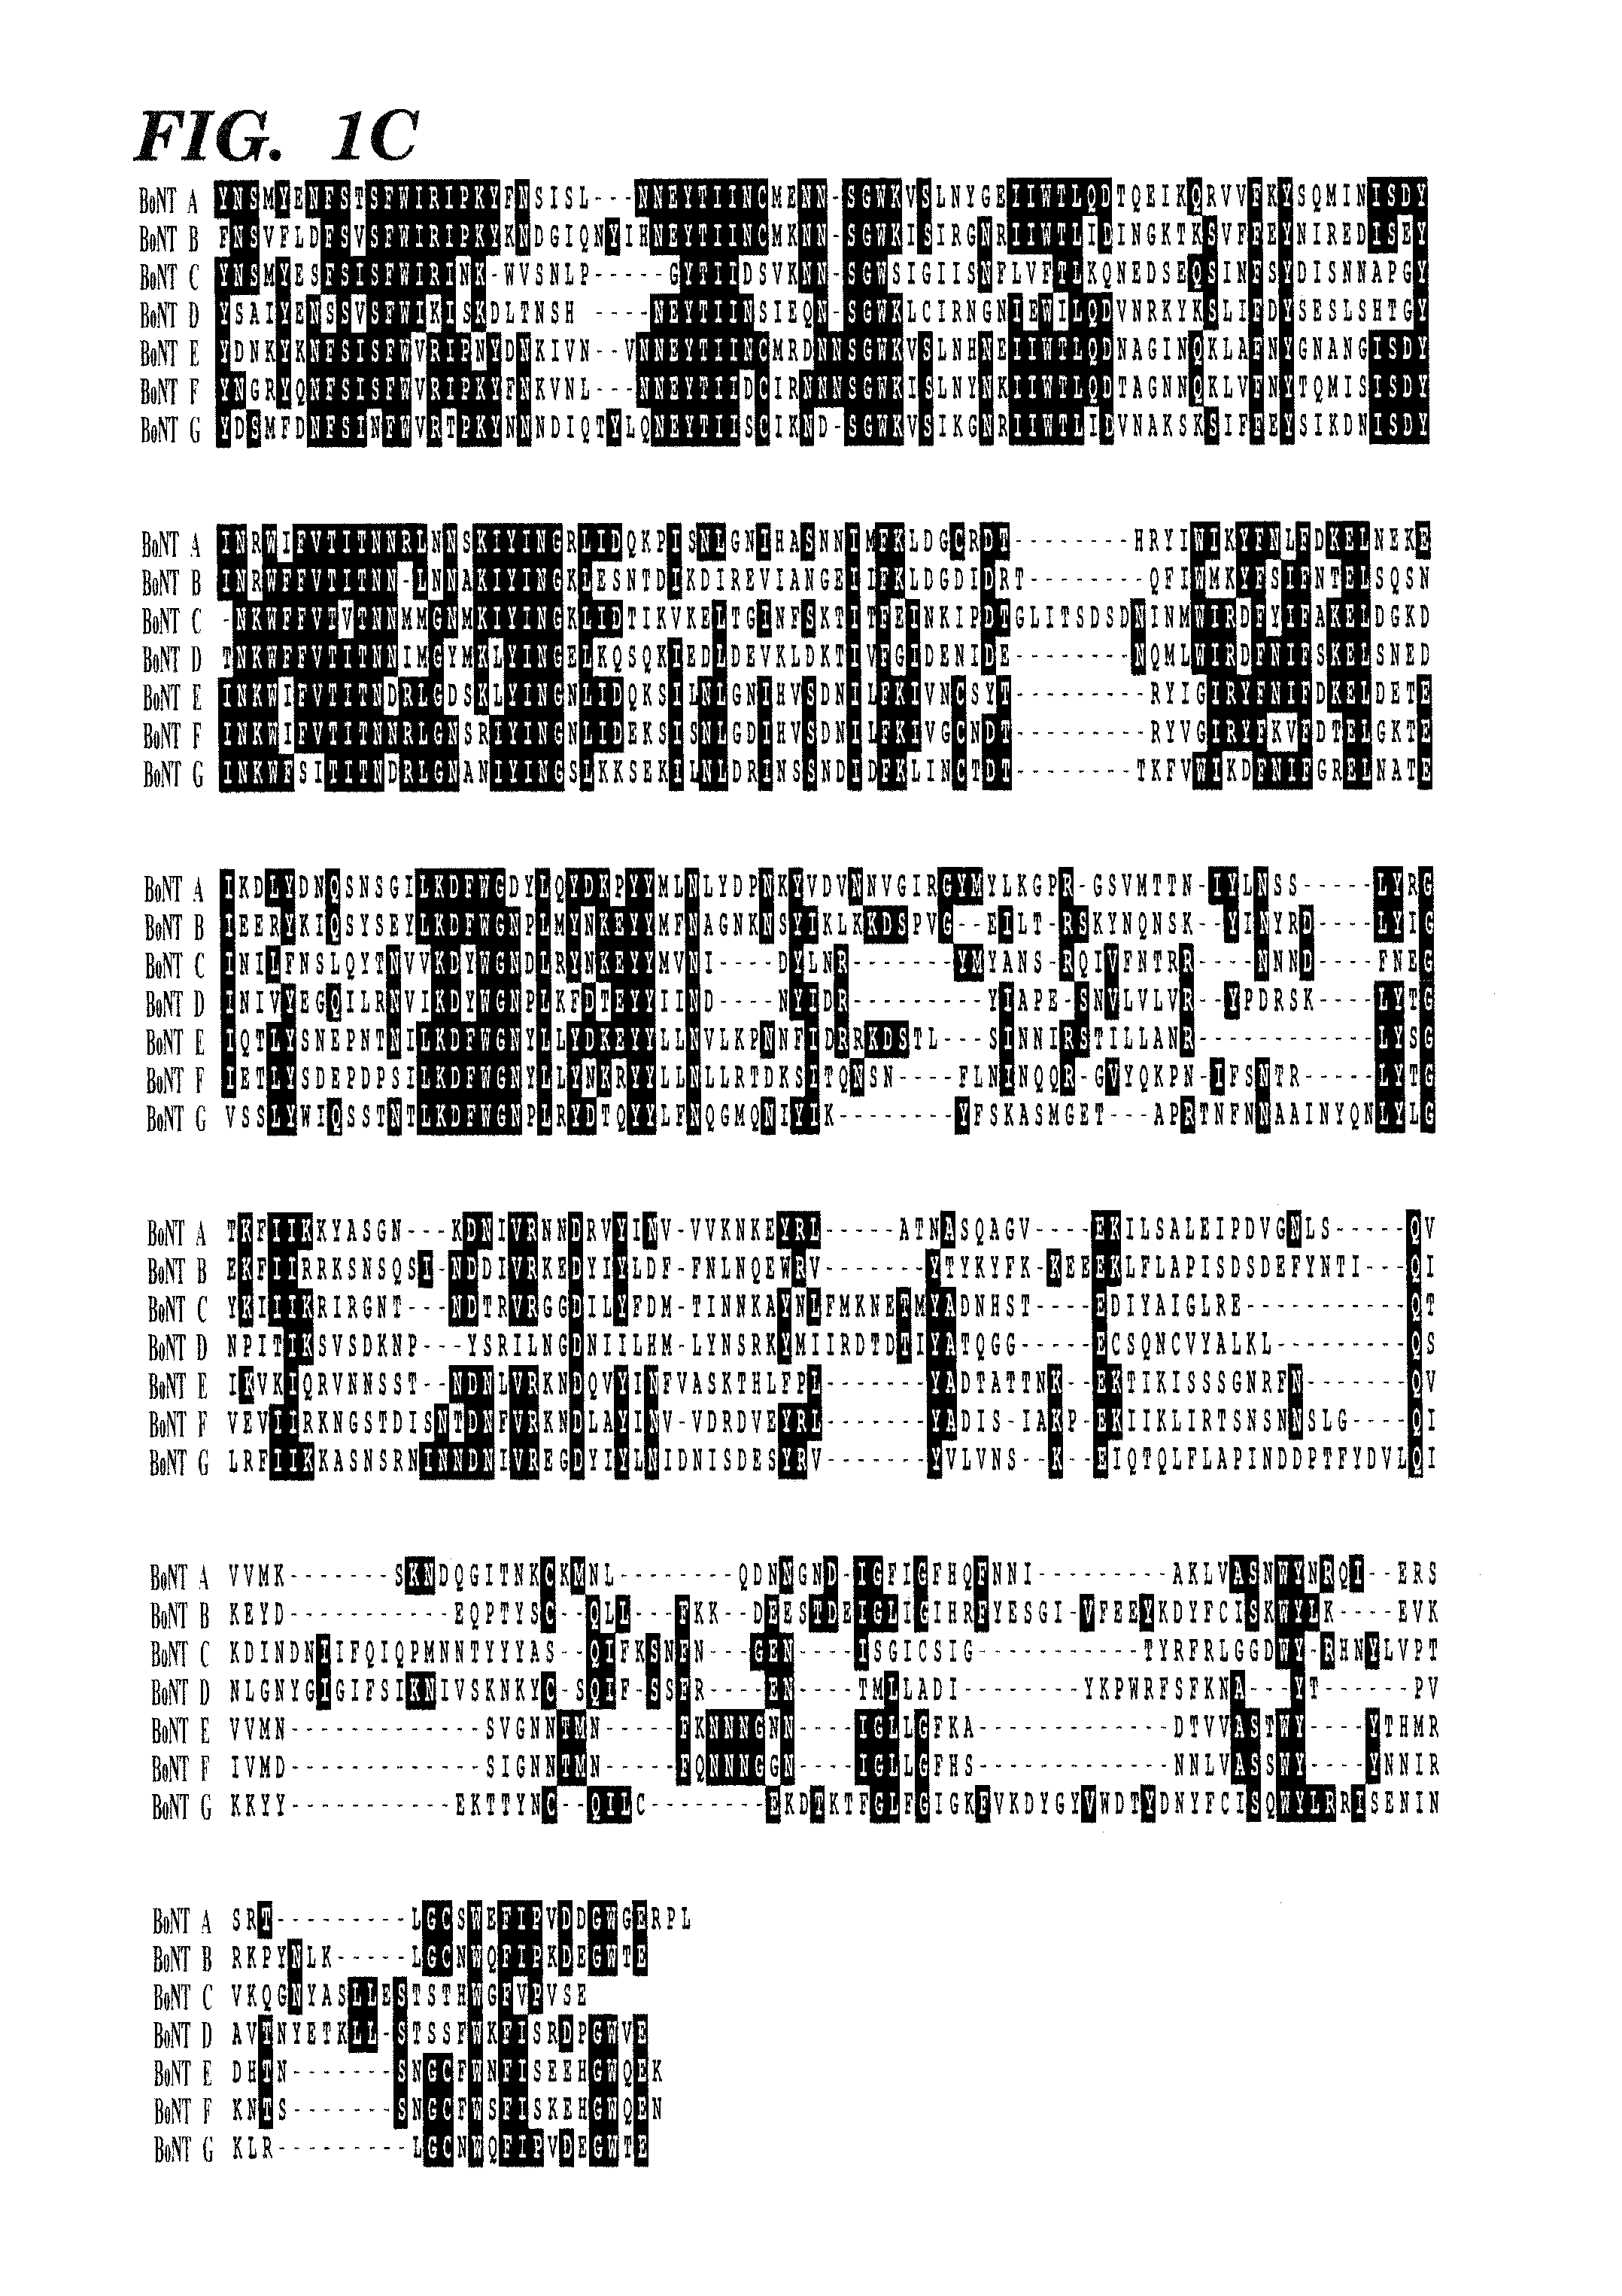 Genetically engineered clostridial genes, proteins encoded by the engineered genes, and uses thereof